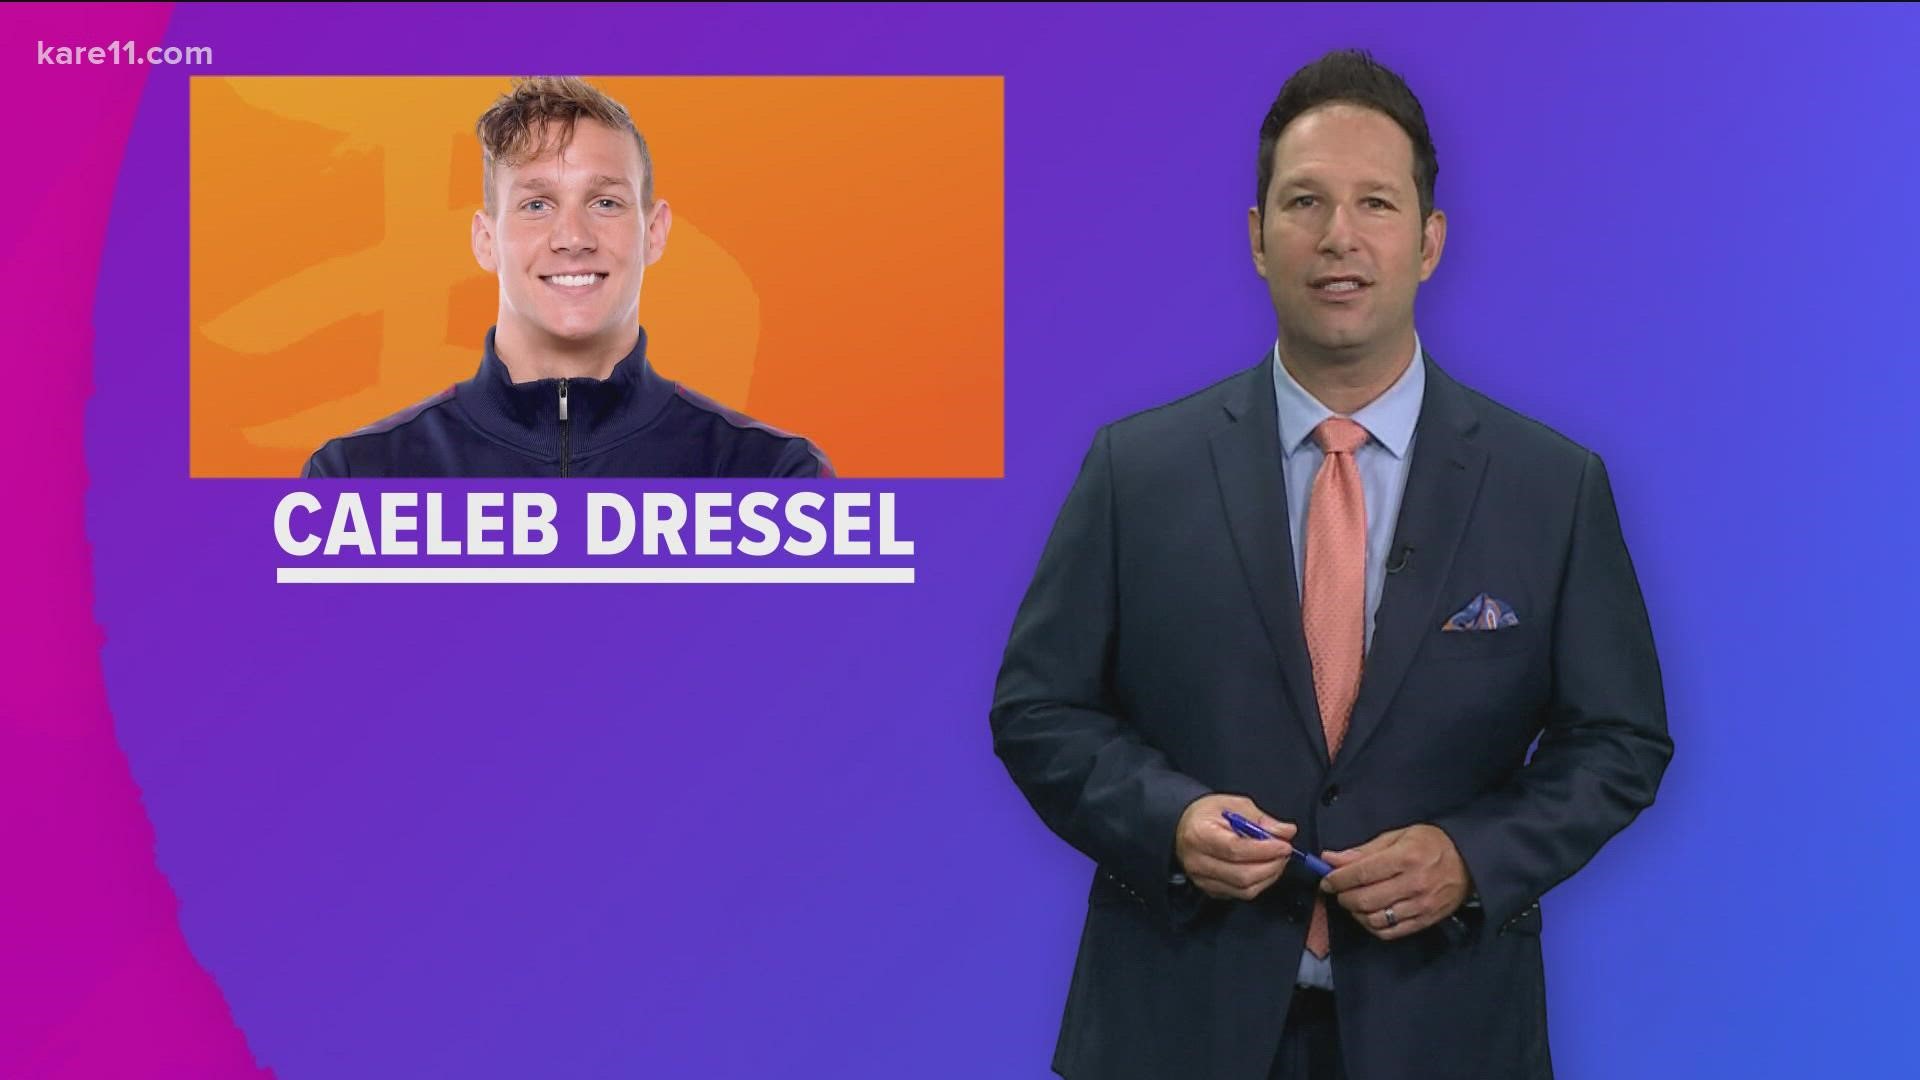 Caeleb Dressel is on KARE 11's 10 to Watch radar. The 24-year-old swimmer burst onto the Olympic scene in 2016 when he won a pair of relay golds in Rio.